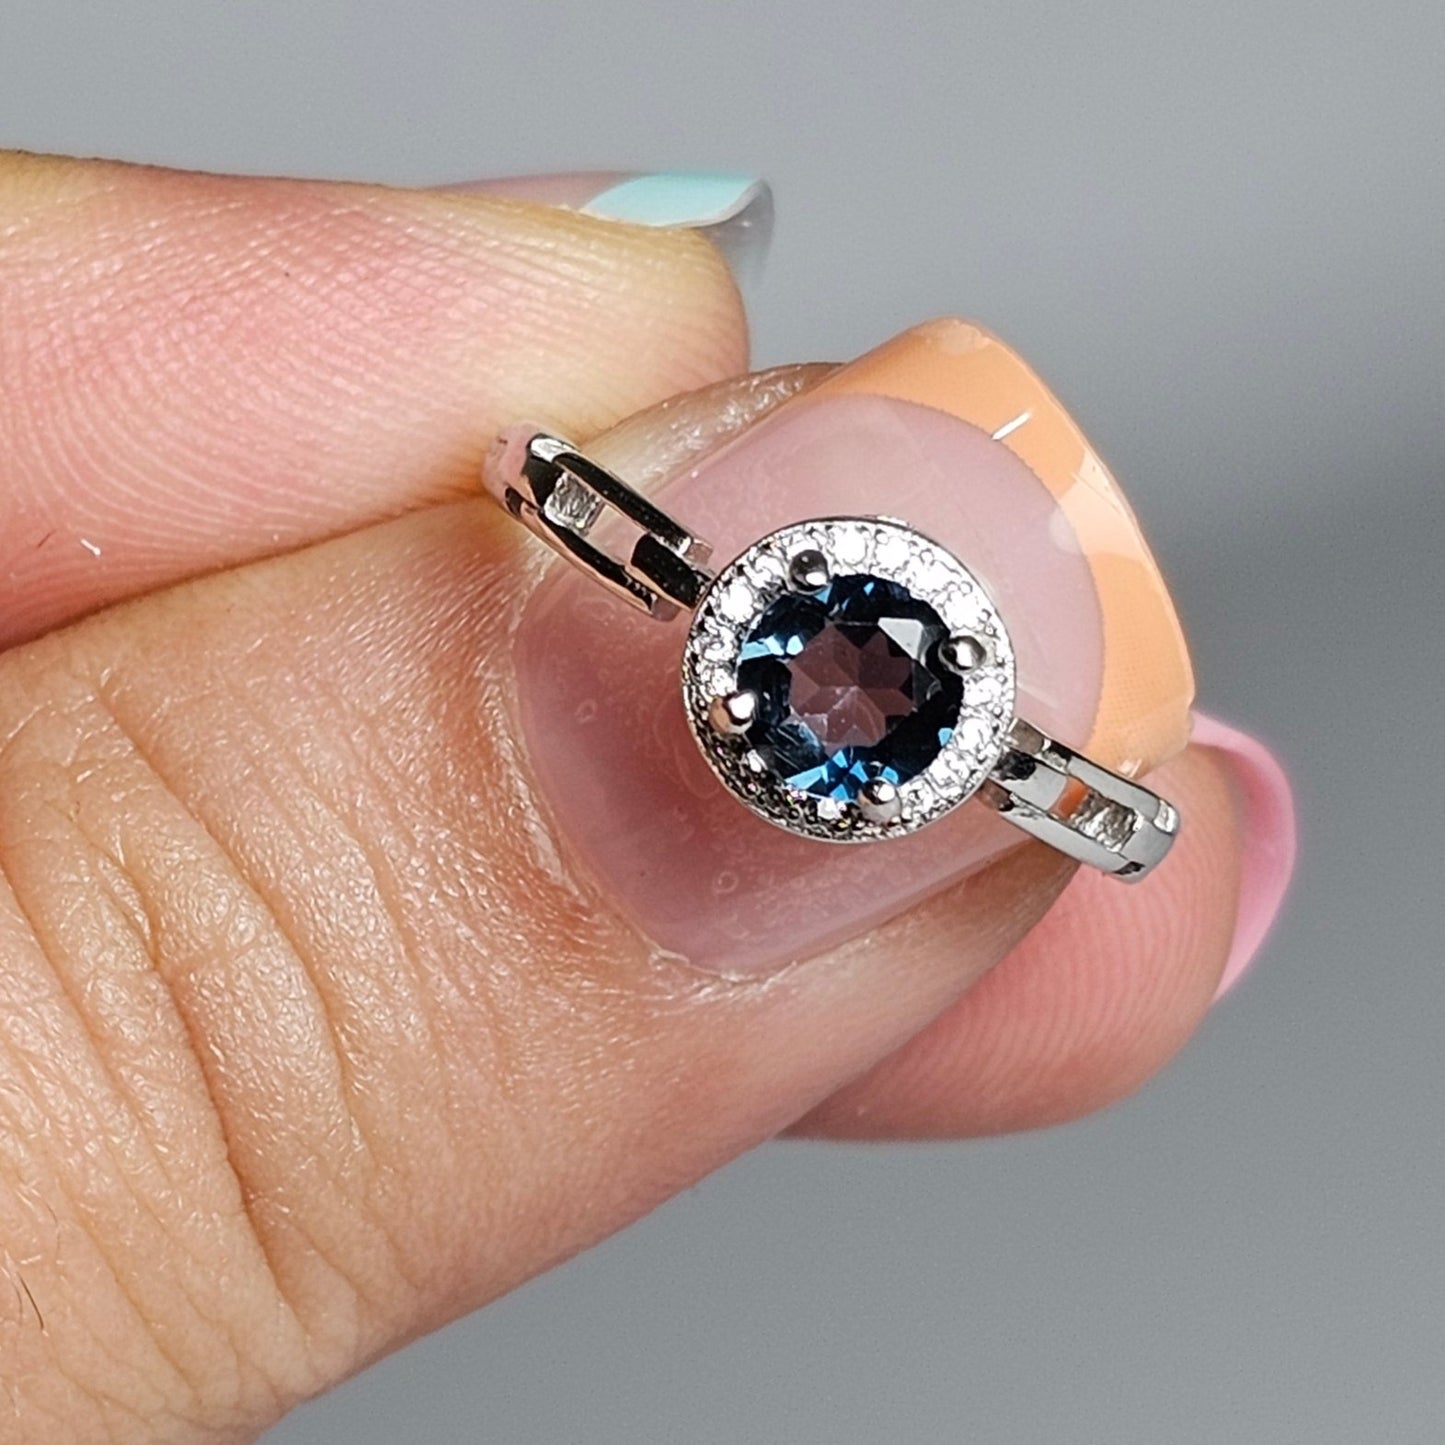 This adjustable ring is crafted from sterling silver and features a gorgeous round London Blue Topaz centre stone on a zircon prong setting crown, with link accented shoulder ring band.